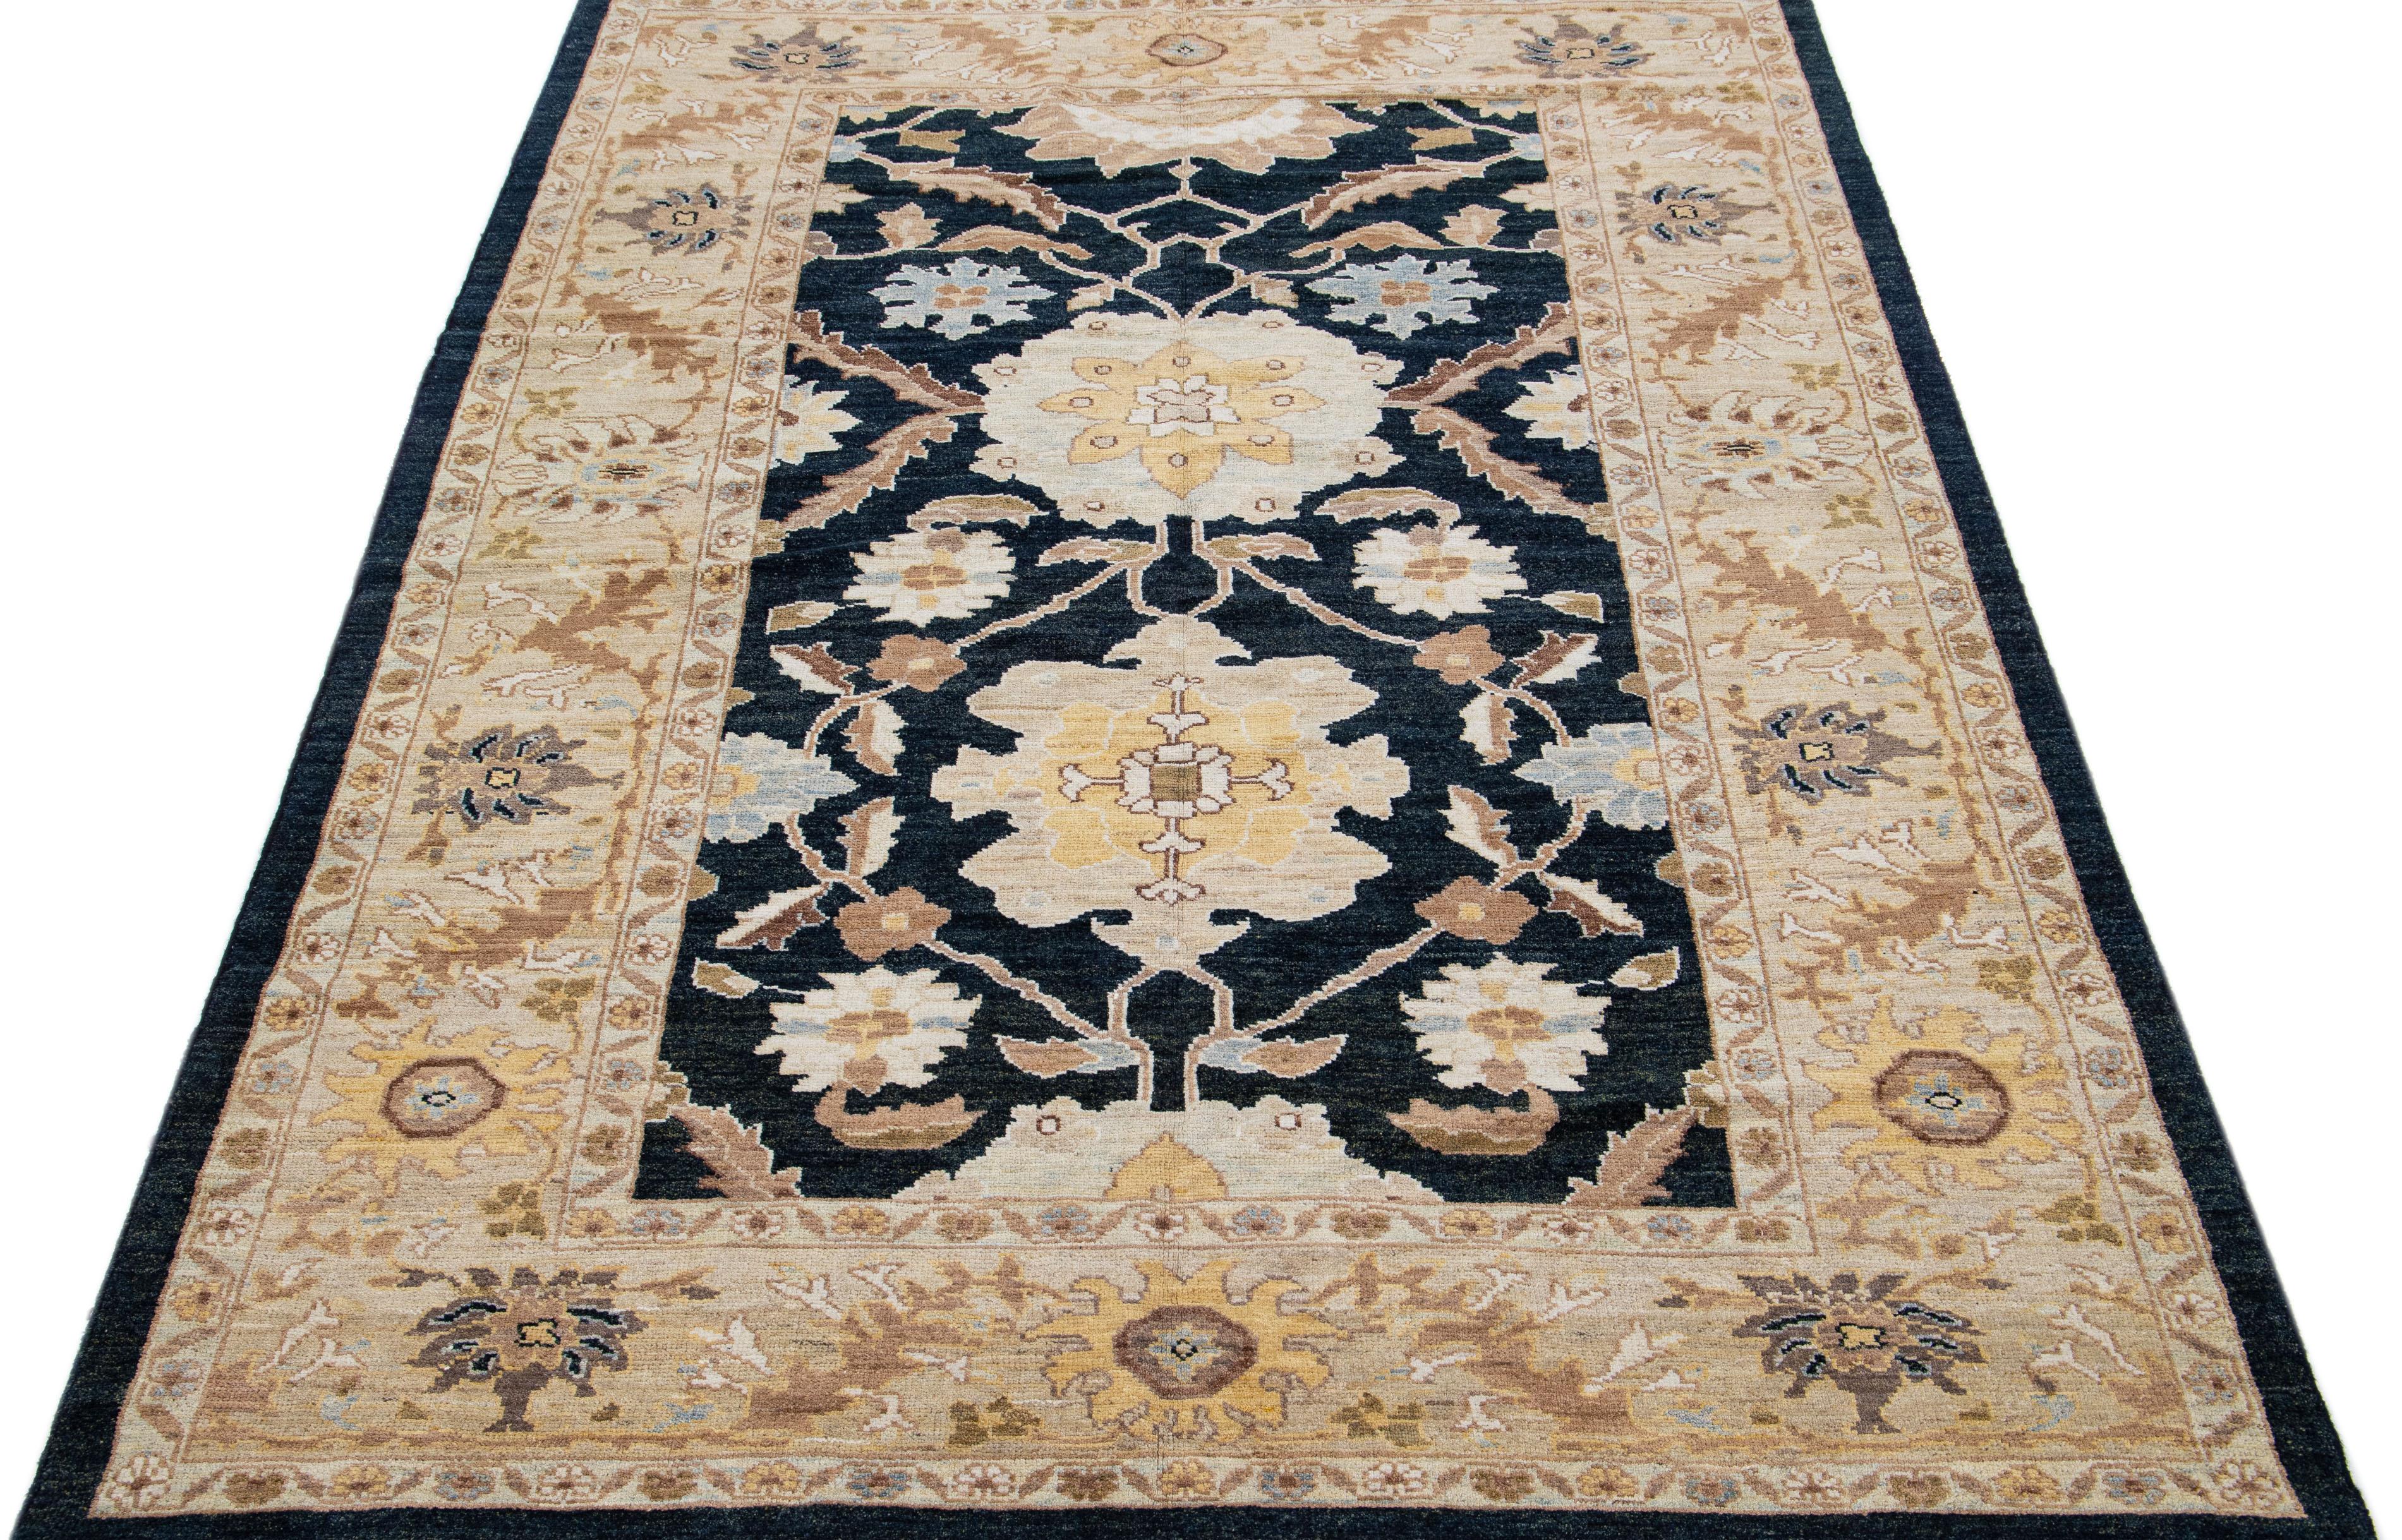 Beautiful modern Sultanabad hand-knotted wool rug with a dark blue color field. This rug has a designed frame with tan, brown, and blue accents in a gorgeous all-over floral design.

This rug measures: 6'8